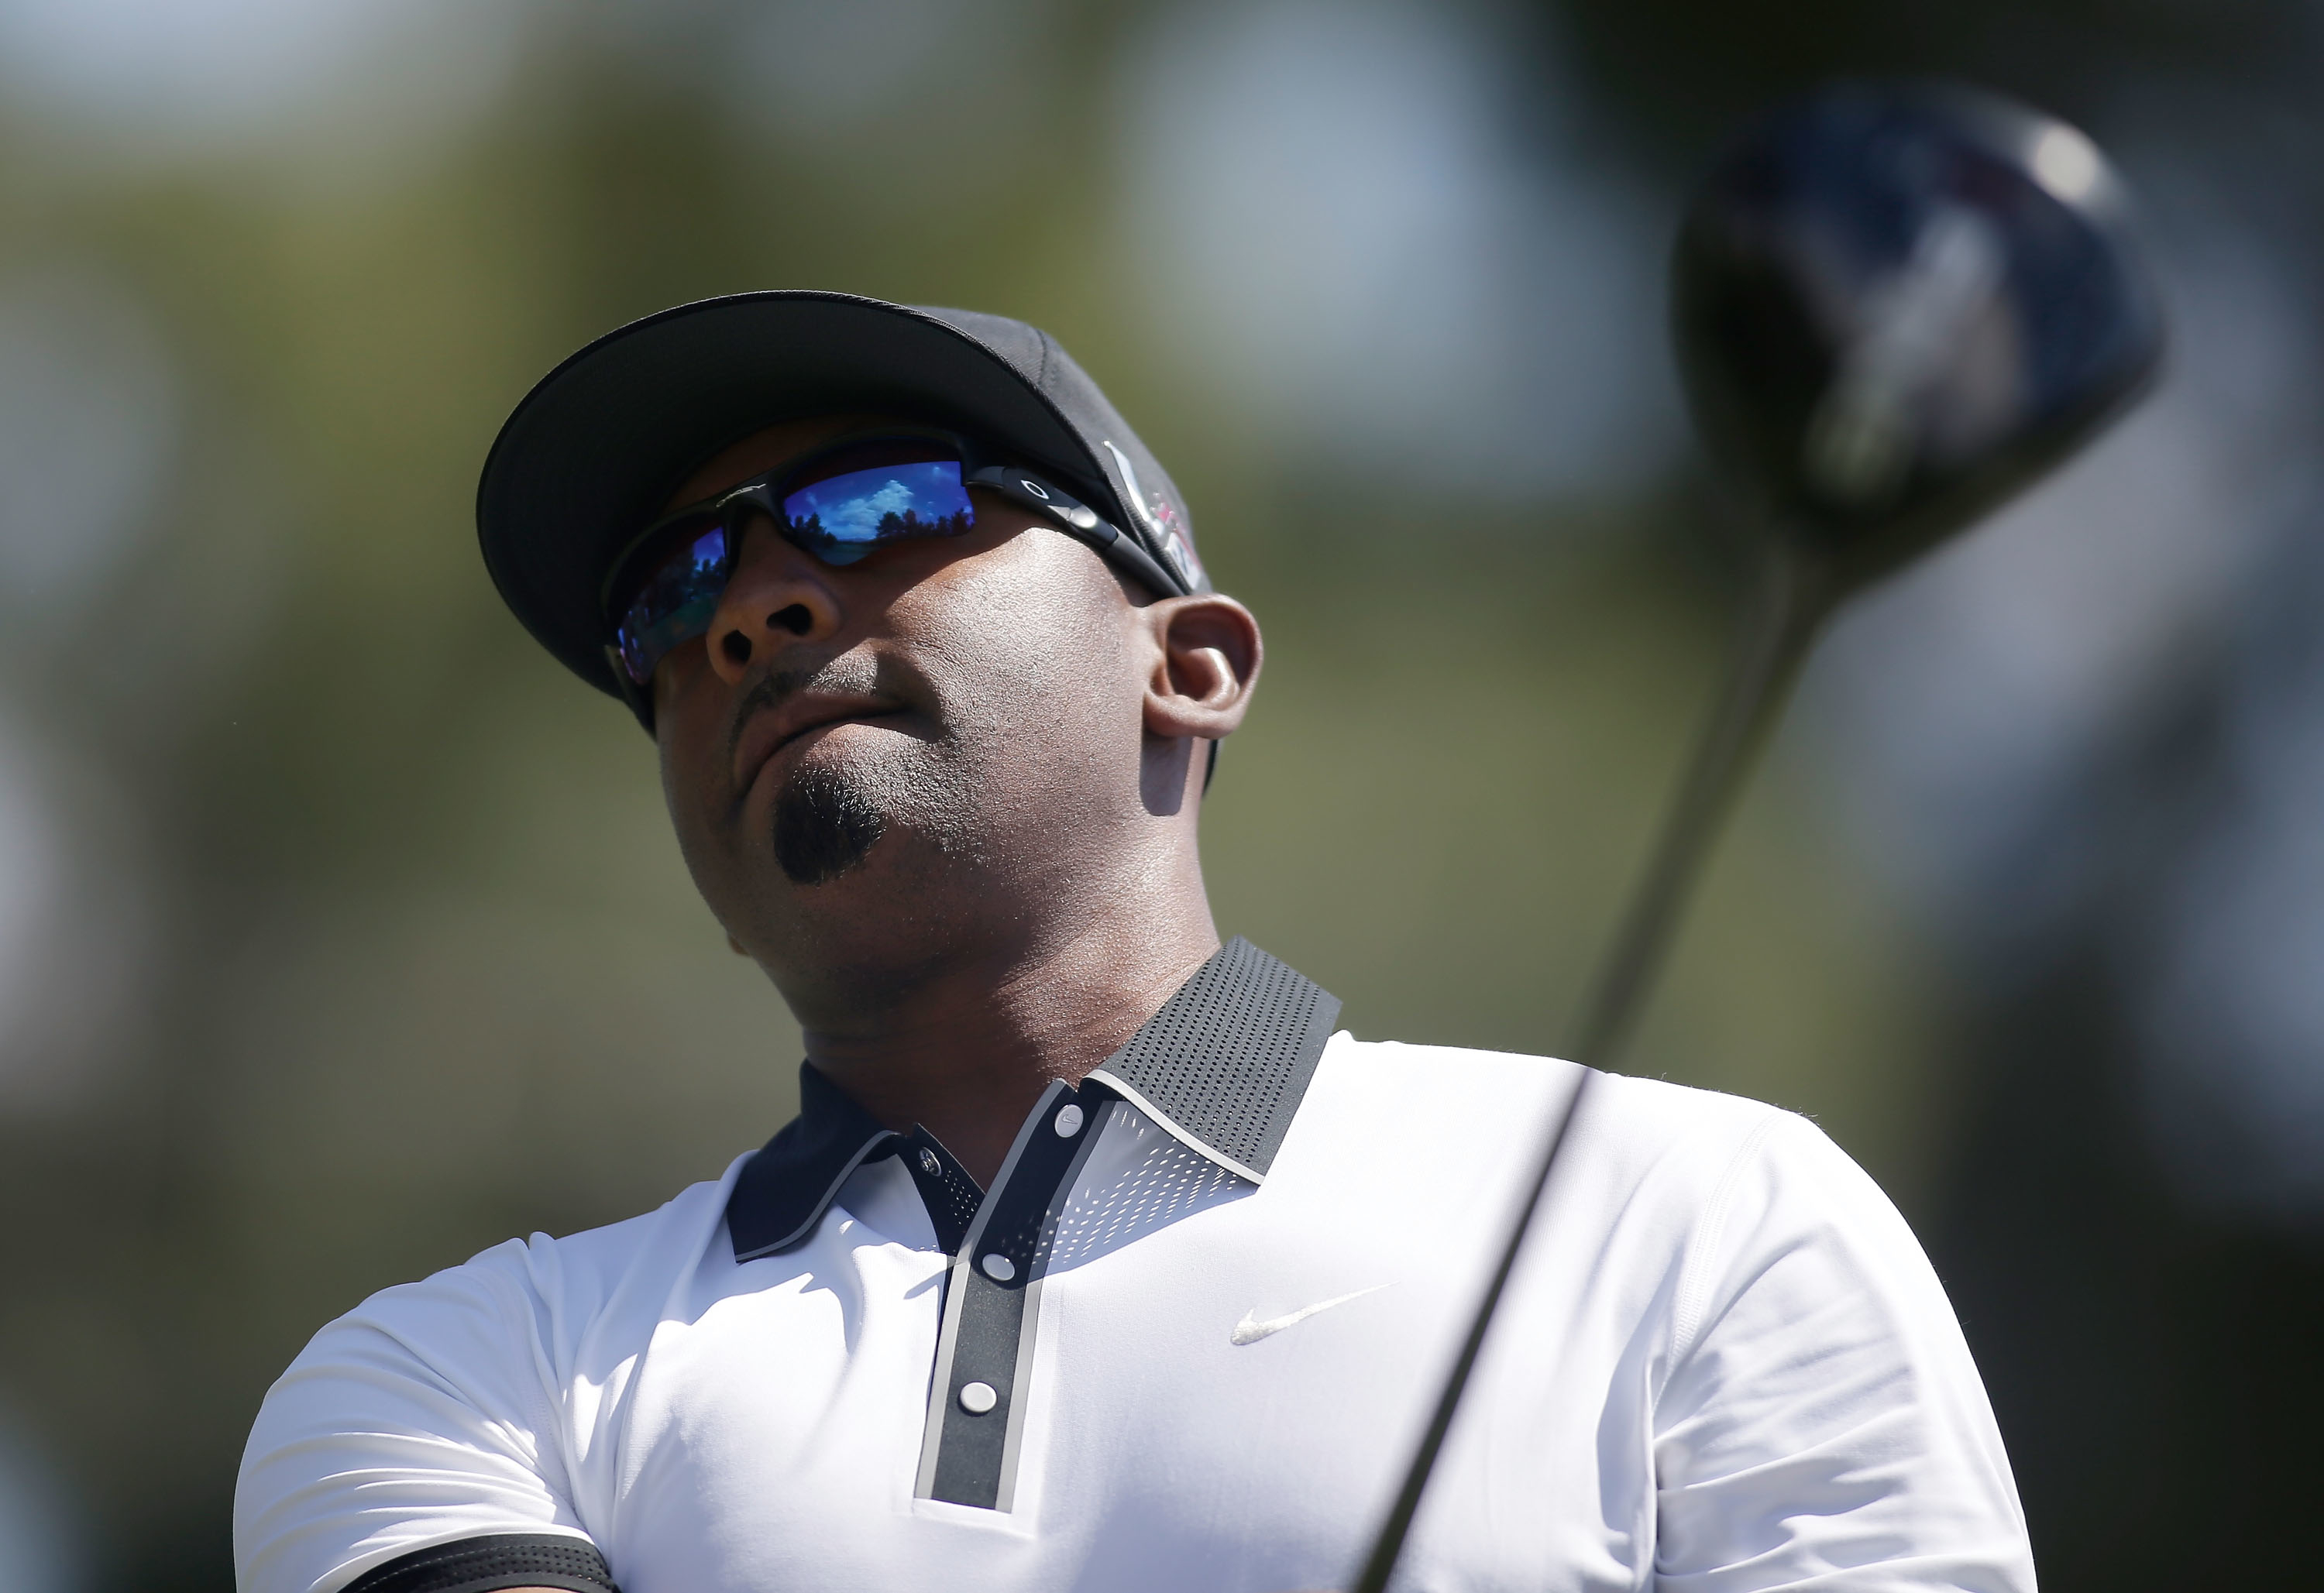 Golfer mid-swing with club, focused expression, wearing a cap, sunglasses, and sporty attire